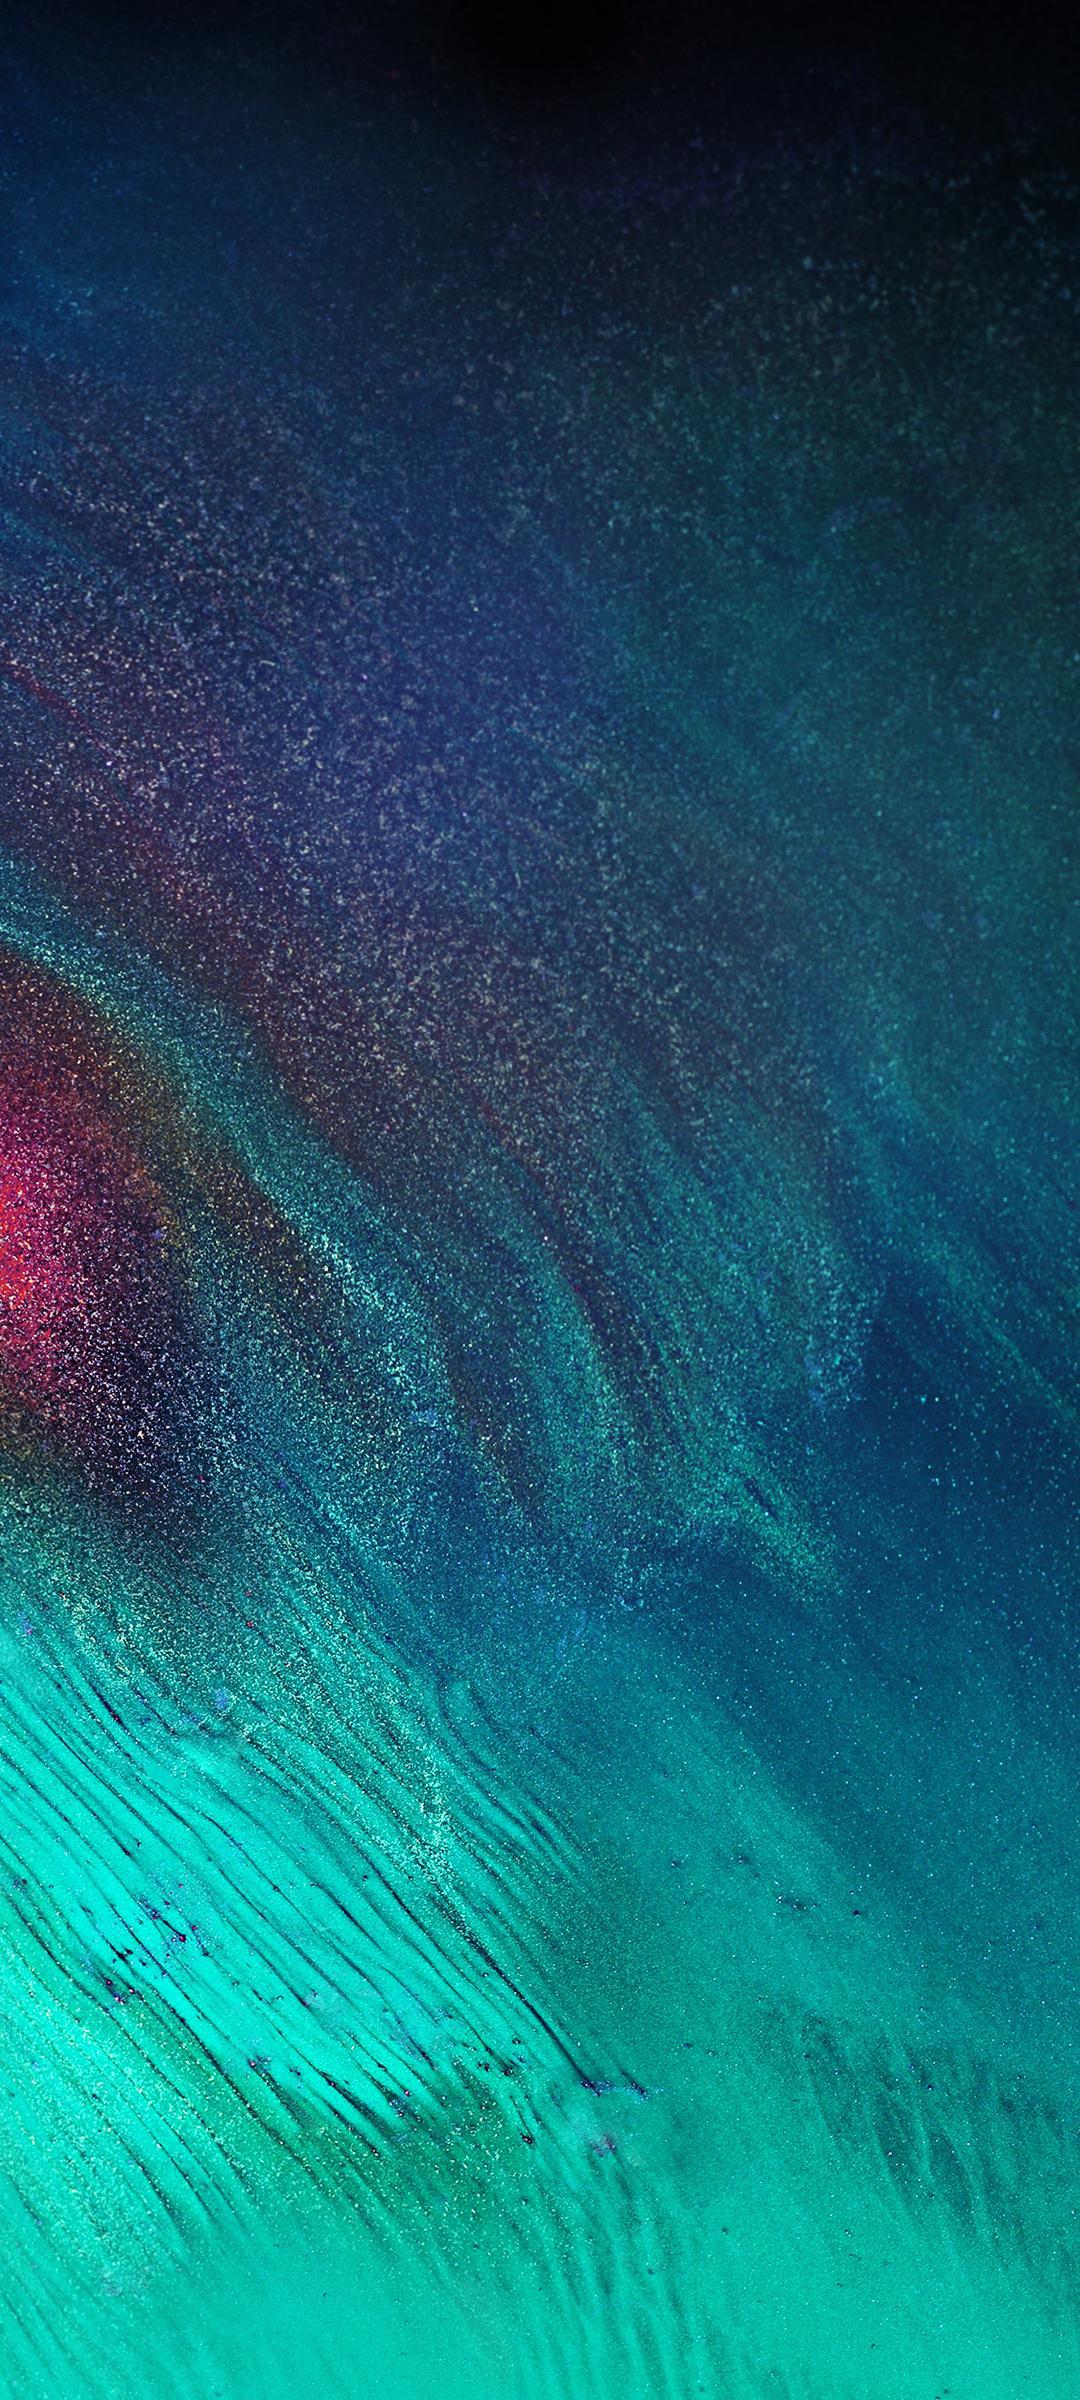 Download Samsung Galaxy A70 Wallpaper. [Download Here]